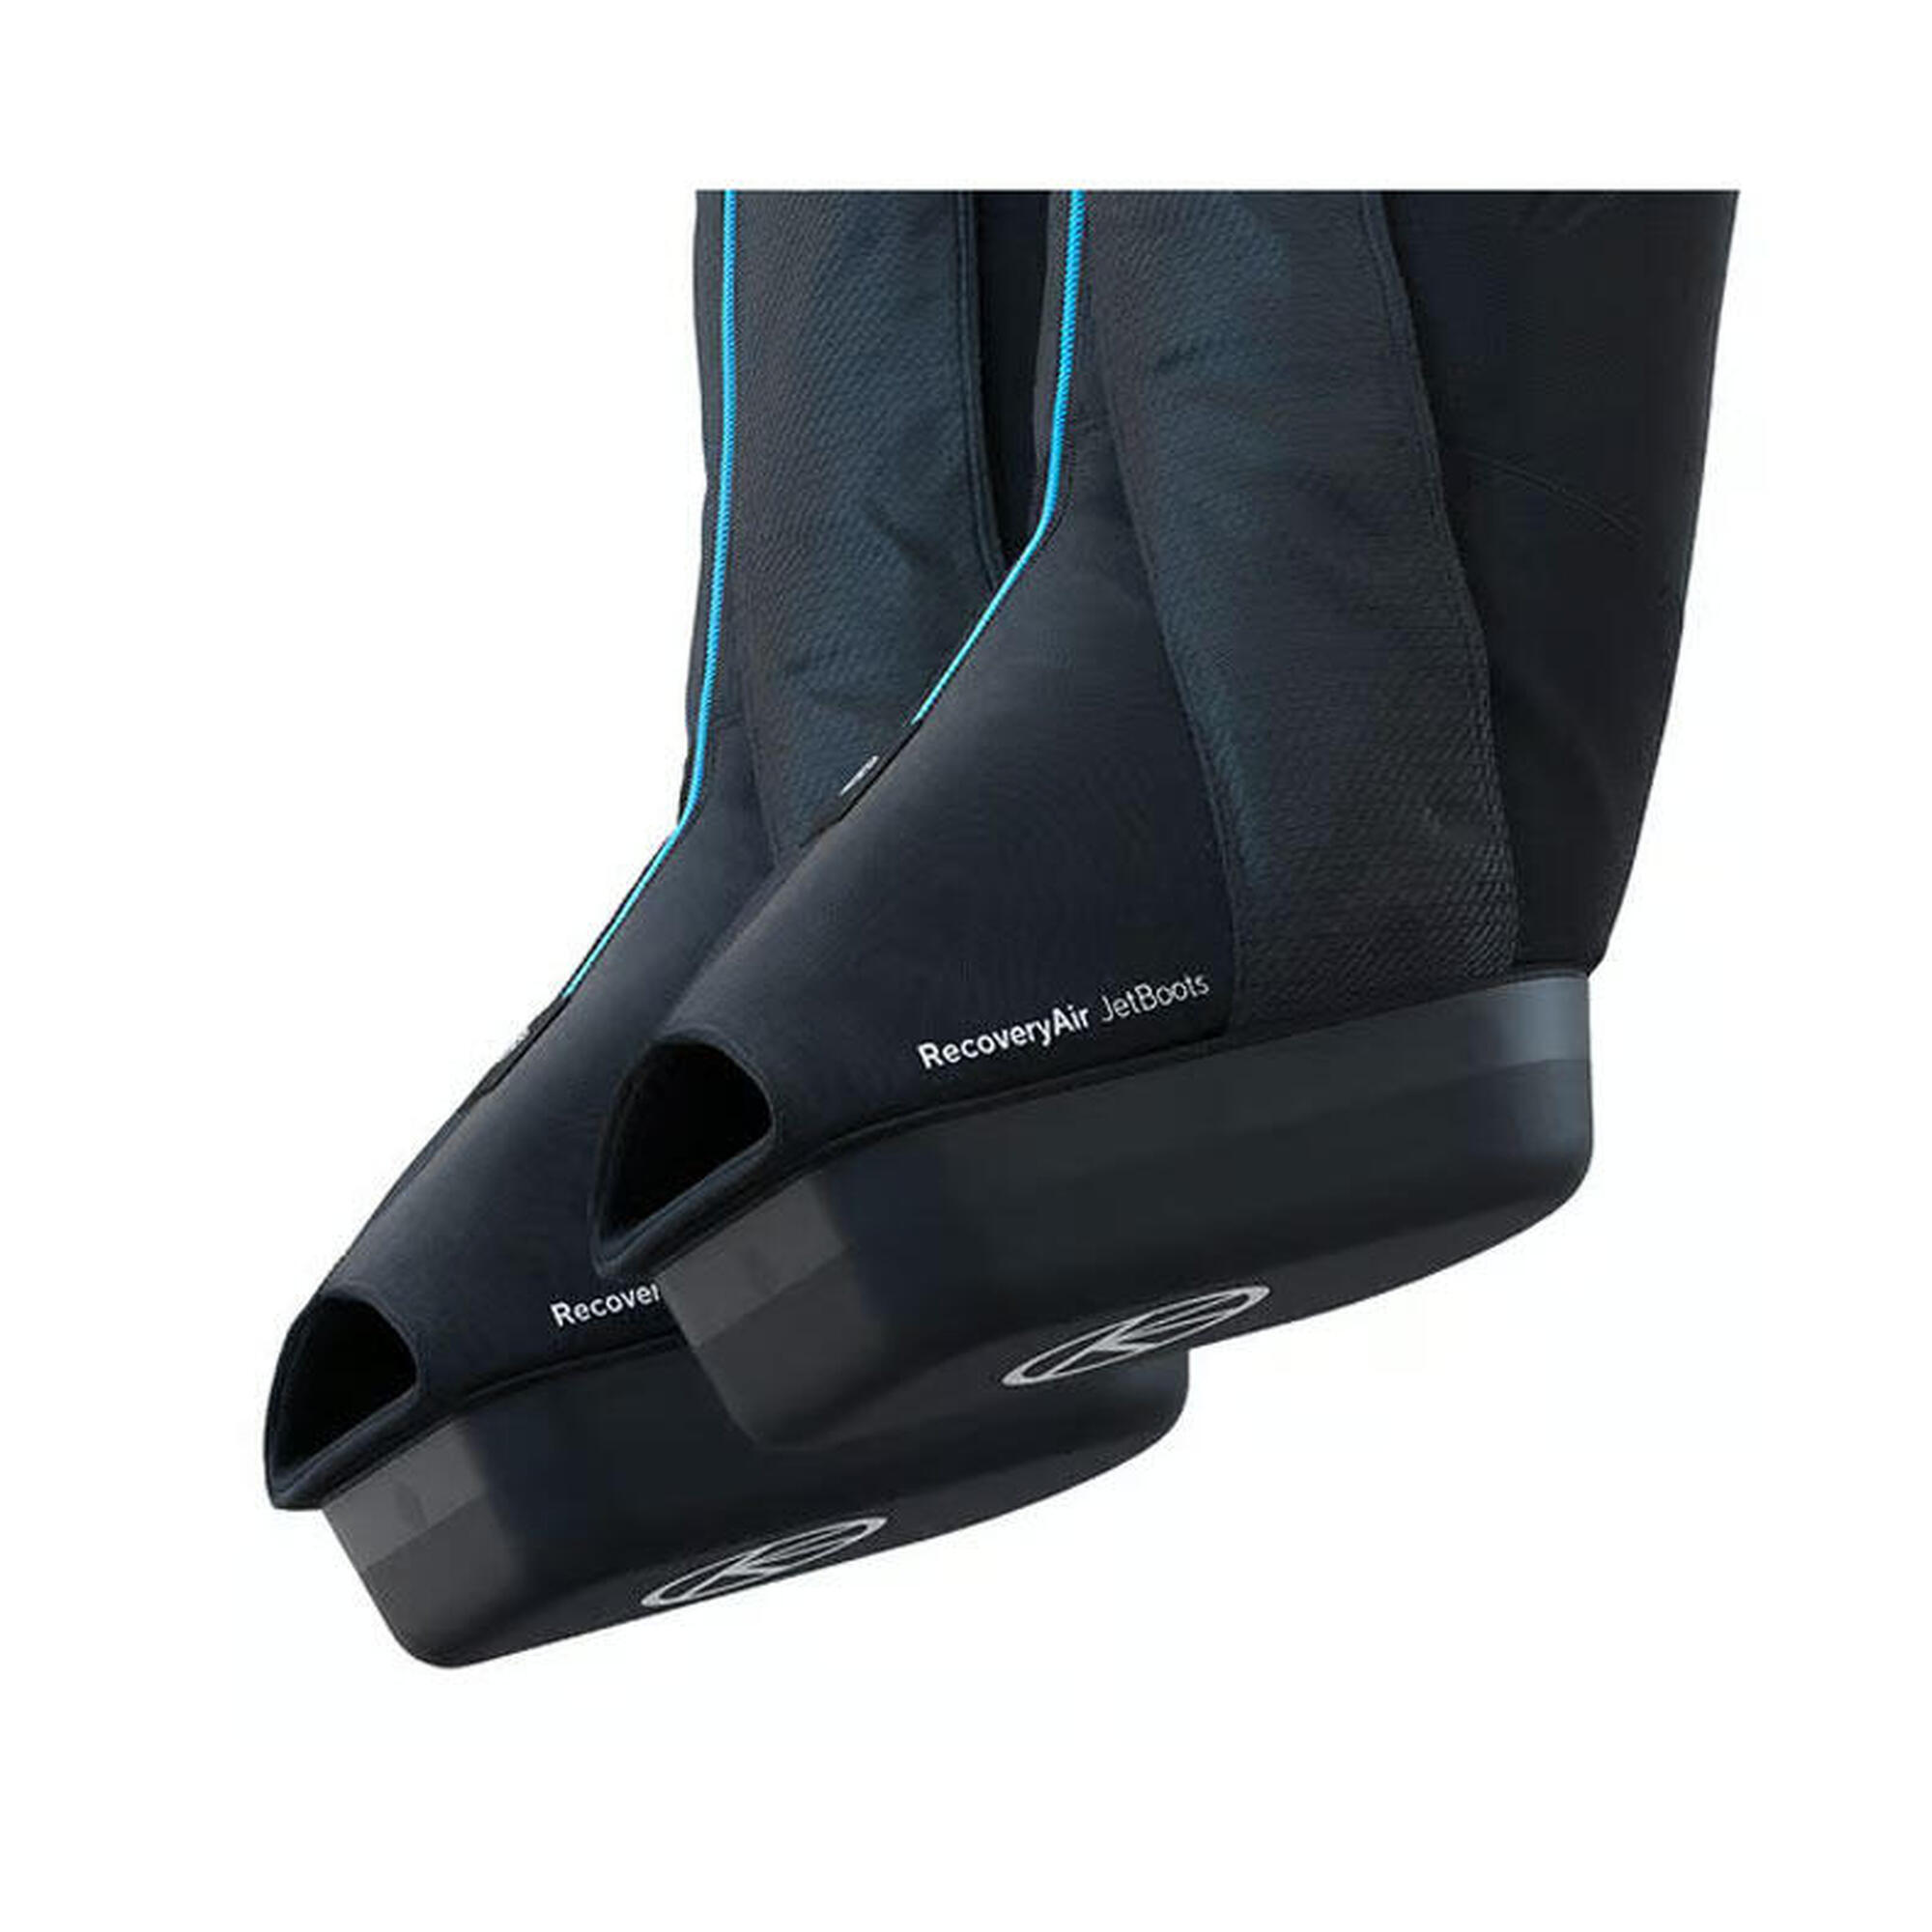 Bottes de Compression Therabody RecoveryAir JetBoots - S